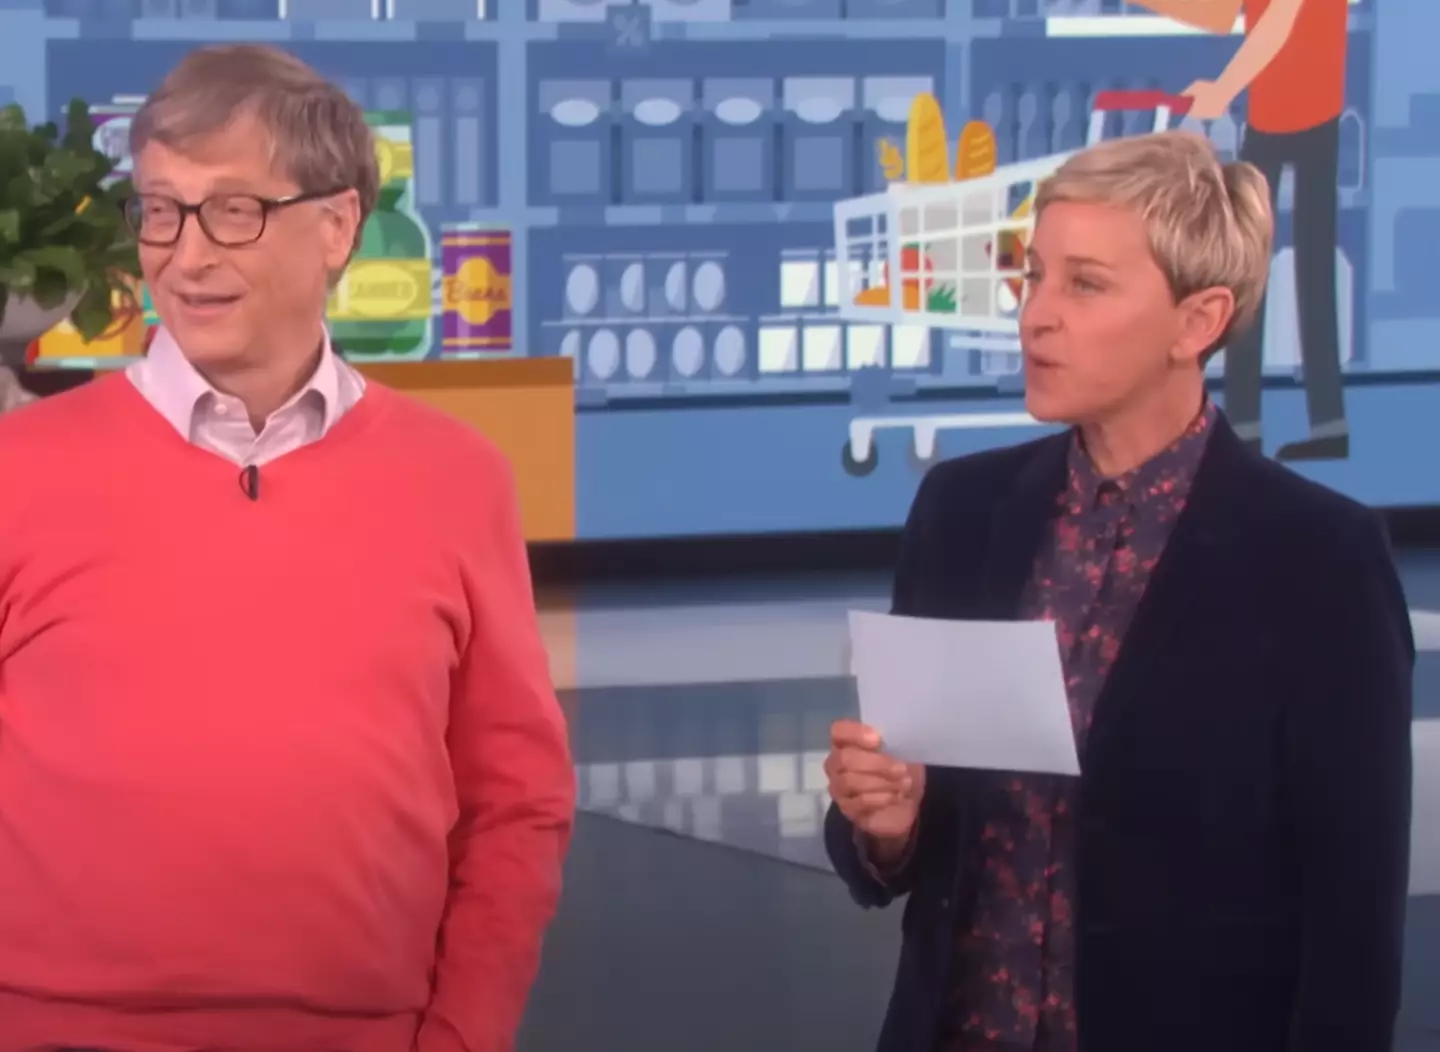 The billionaire was certainly a good sport in all of this.  (The Ellen DeGeneres Show)